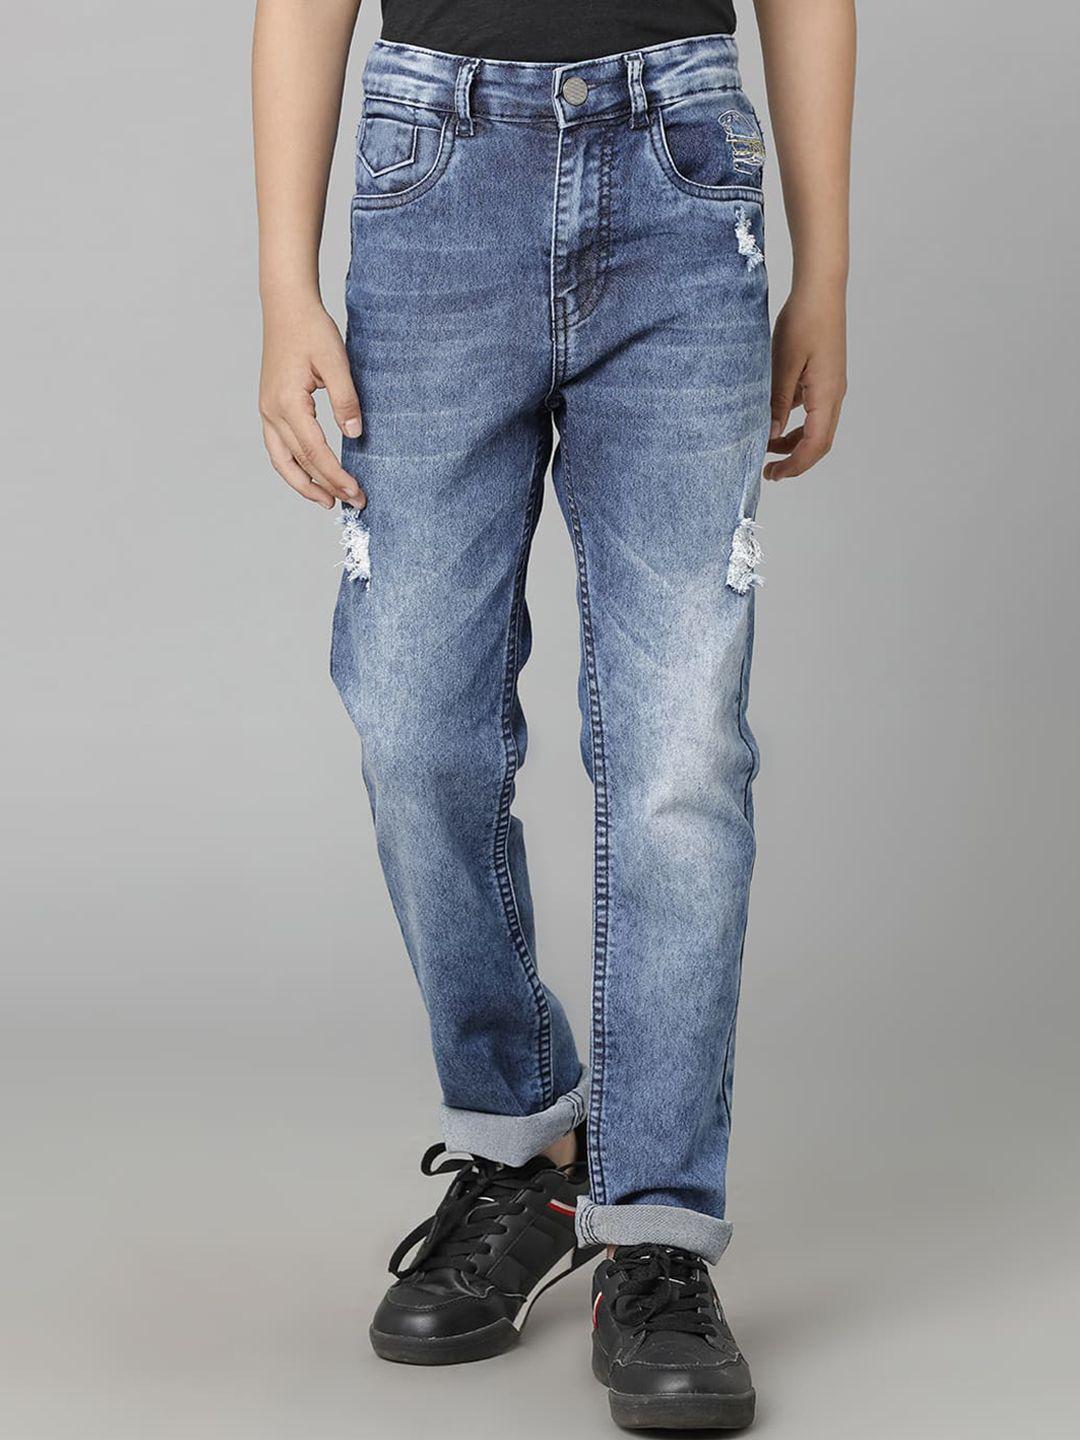 under fourteen only boys mildly distressed heavy fade cotton mid-rise jeans